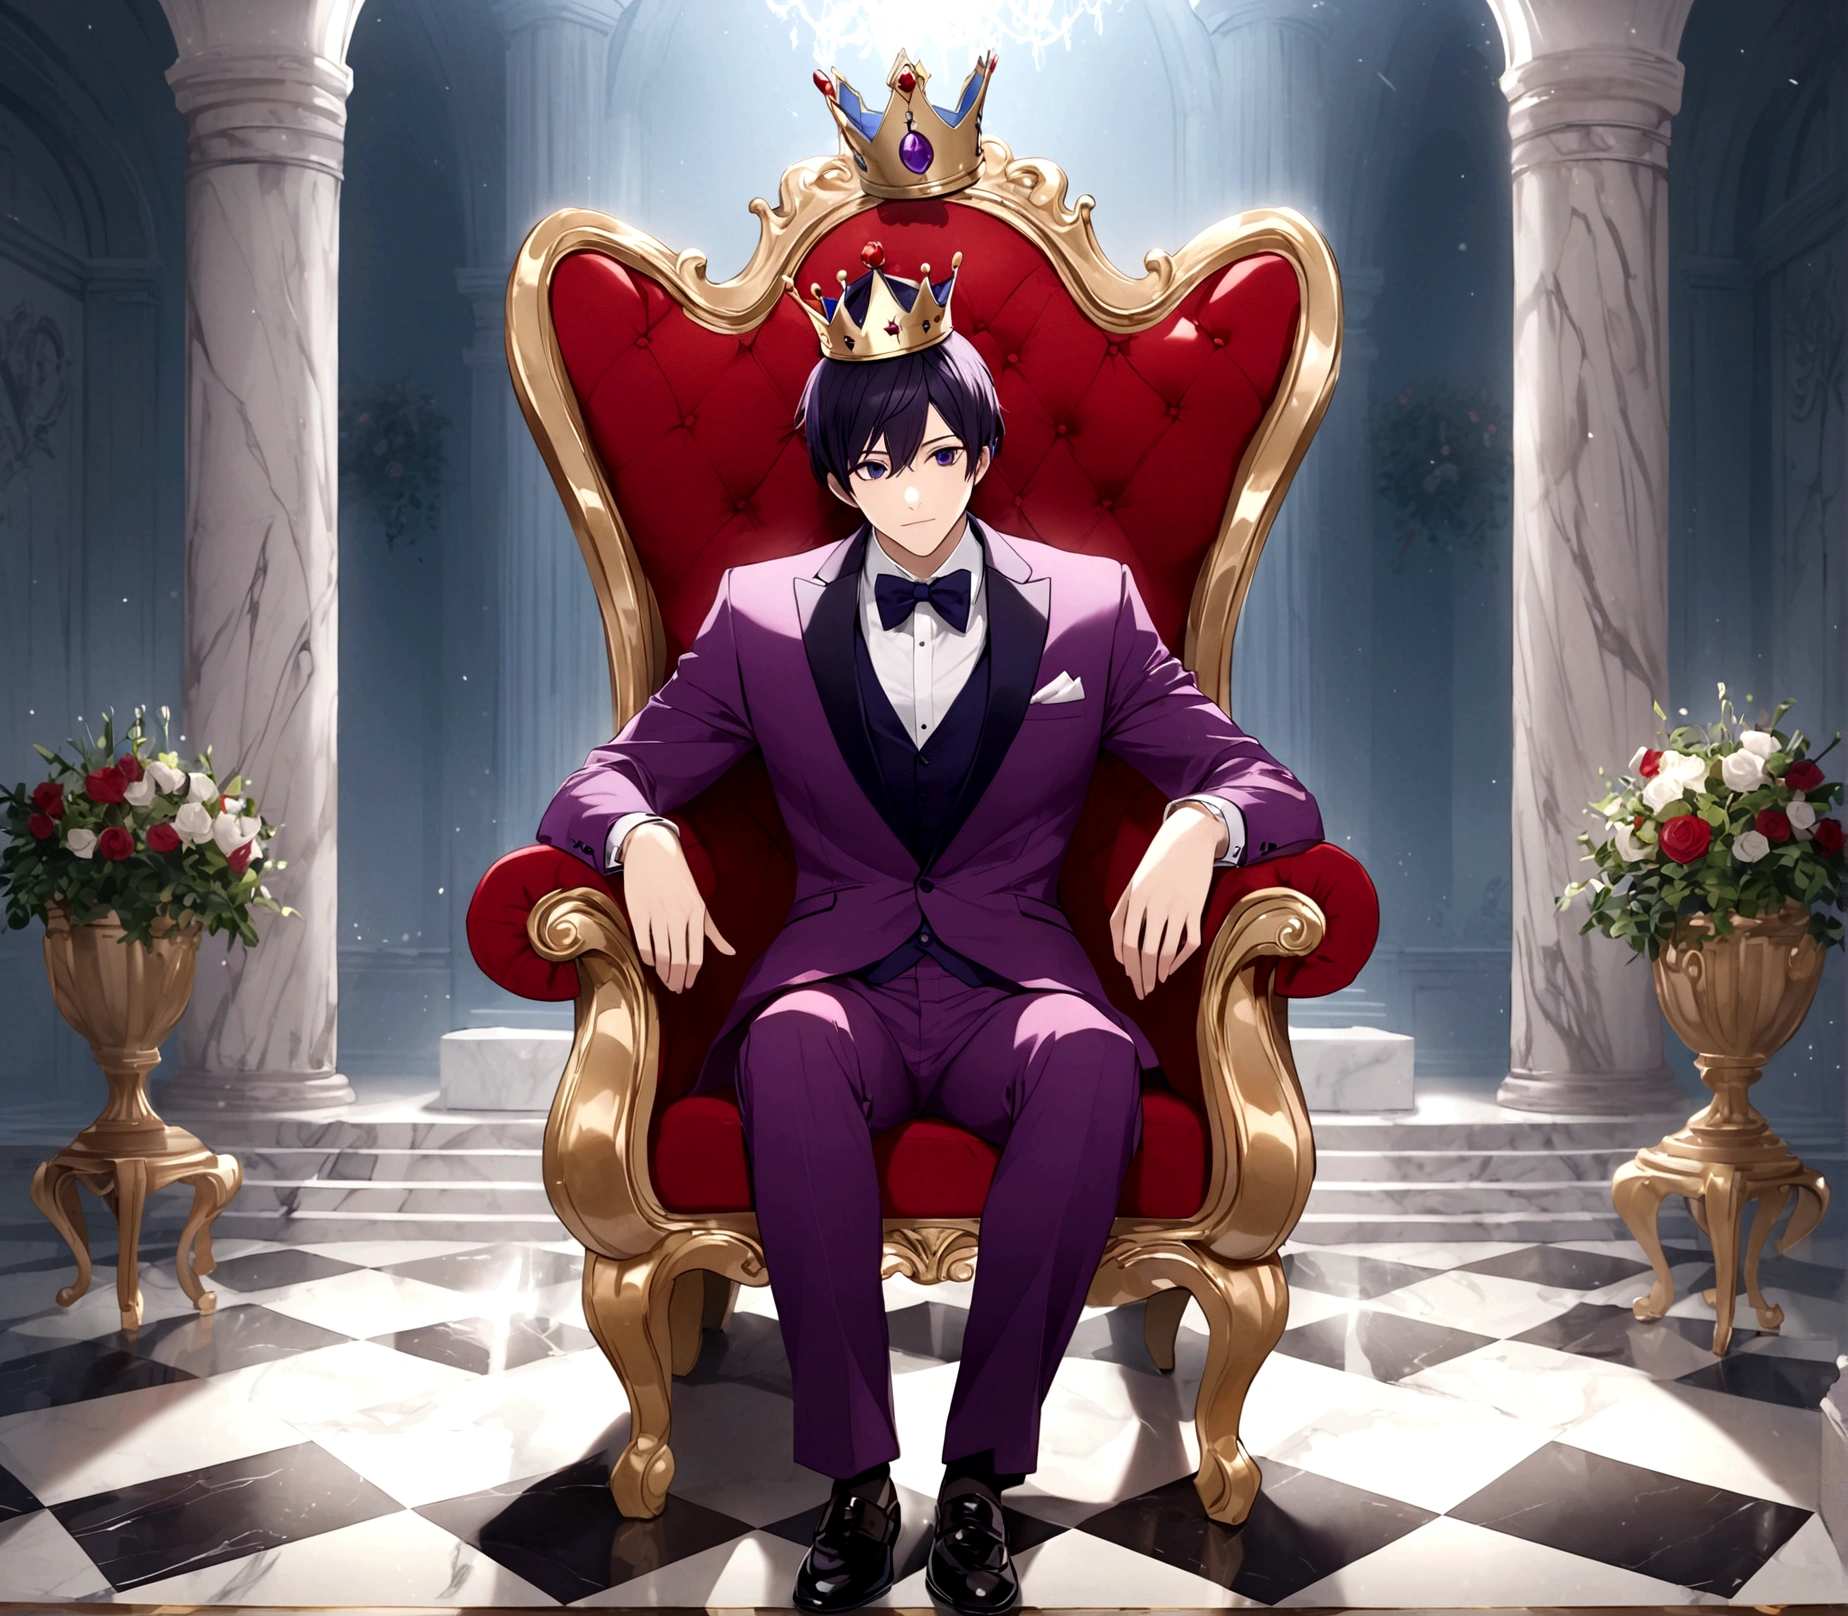 man, Red and purple suit, host, With a crown, Sitting on the throne